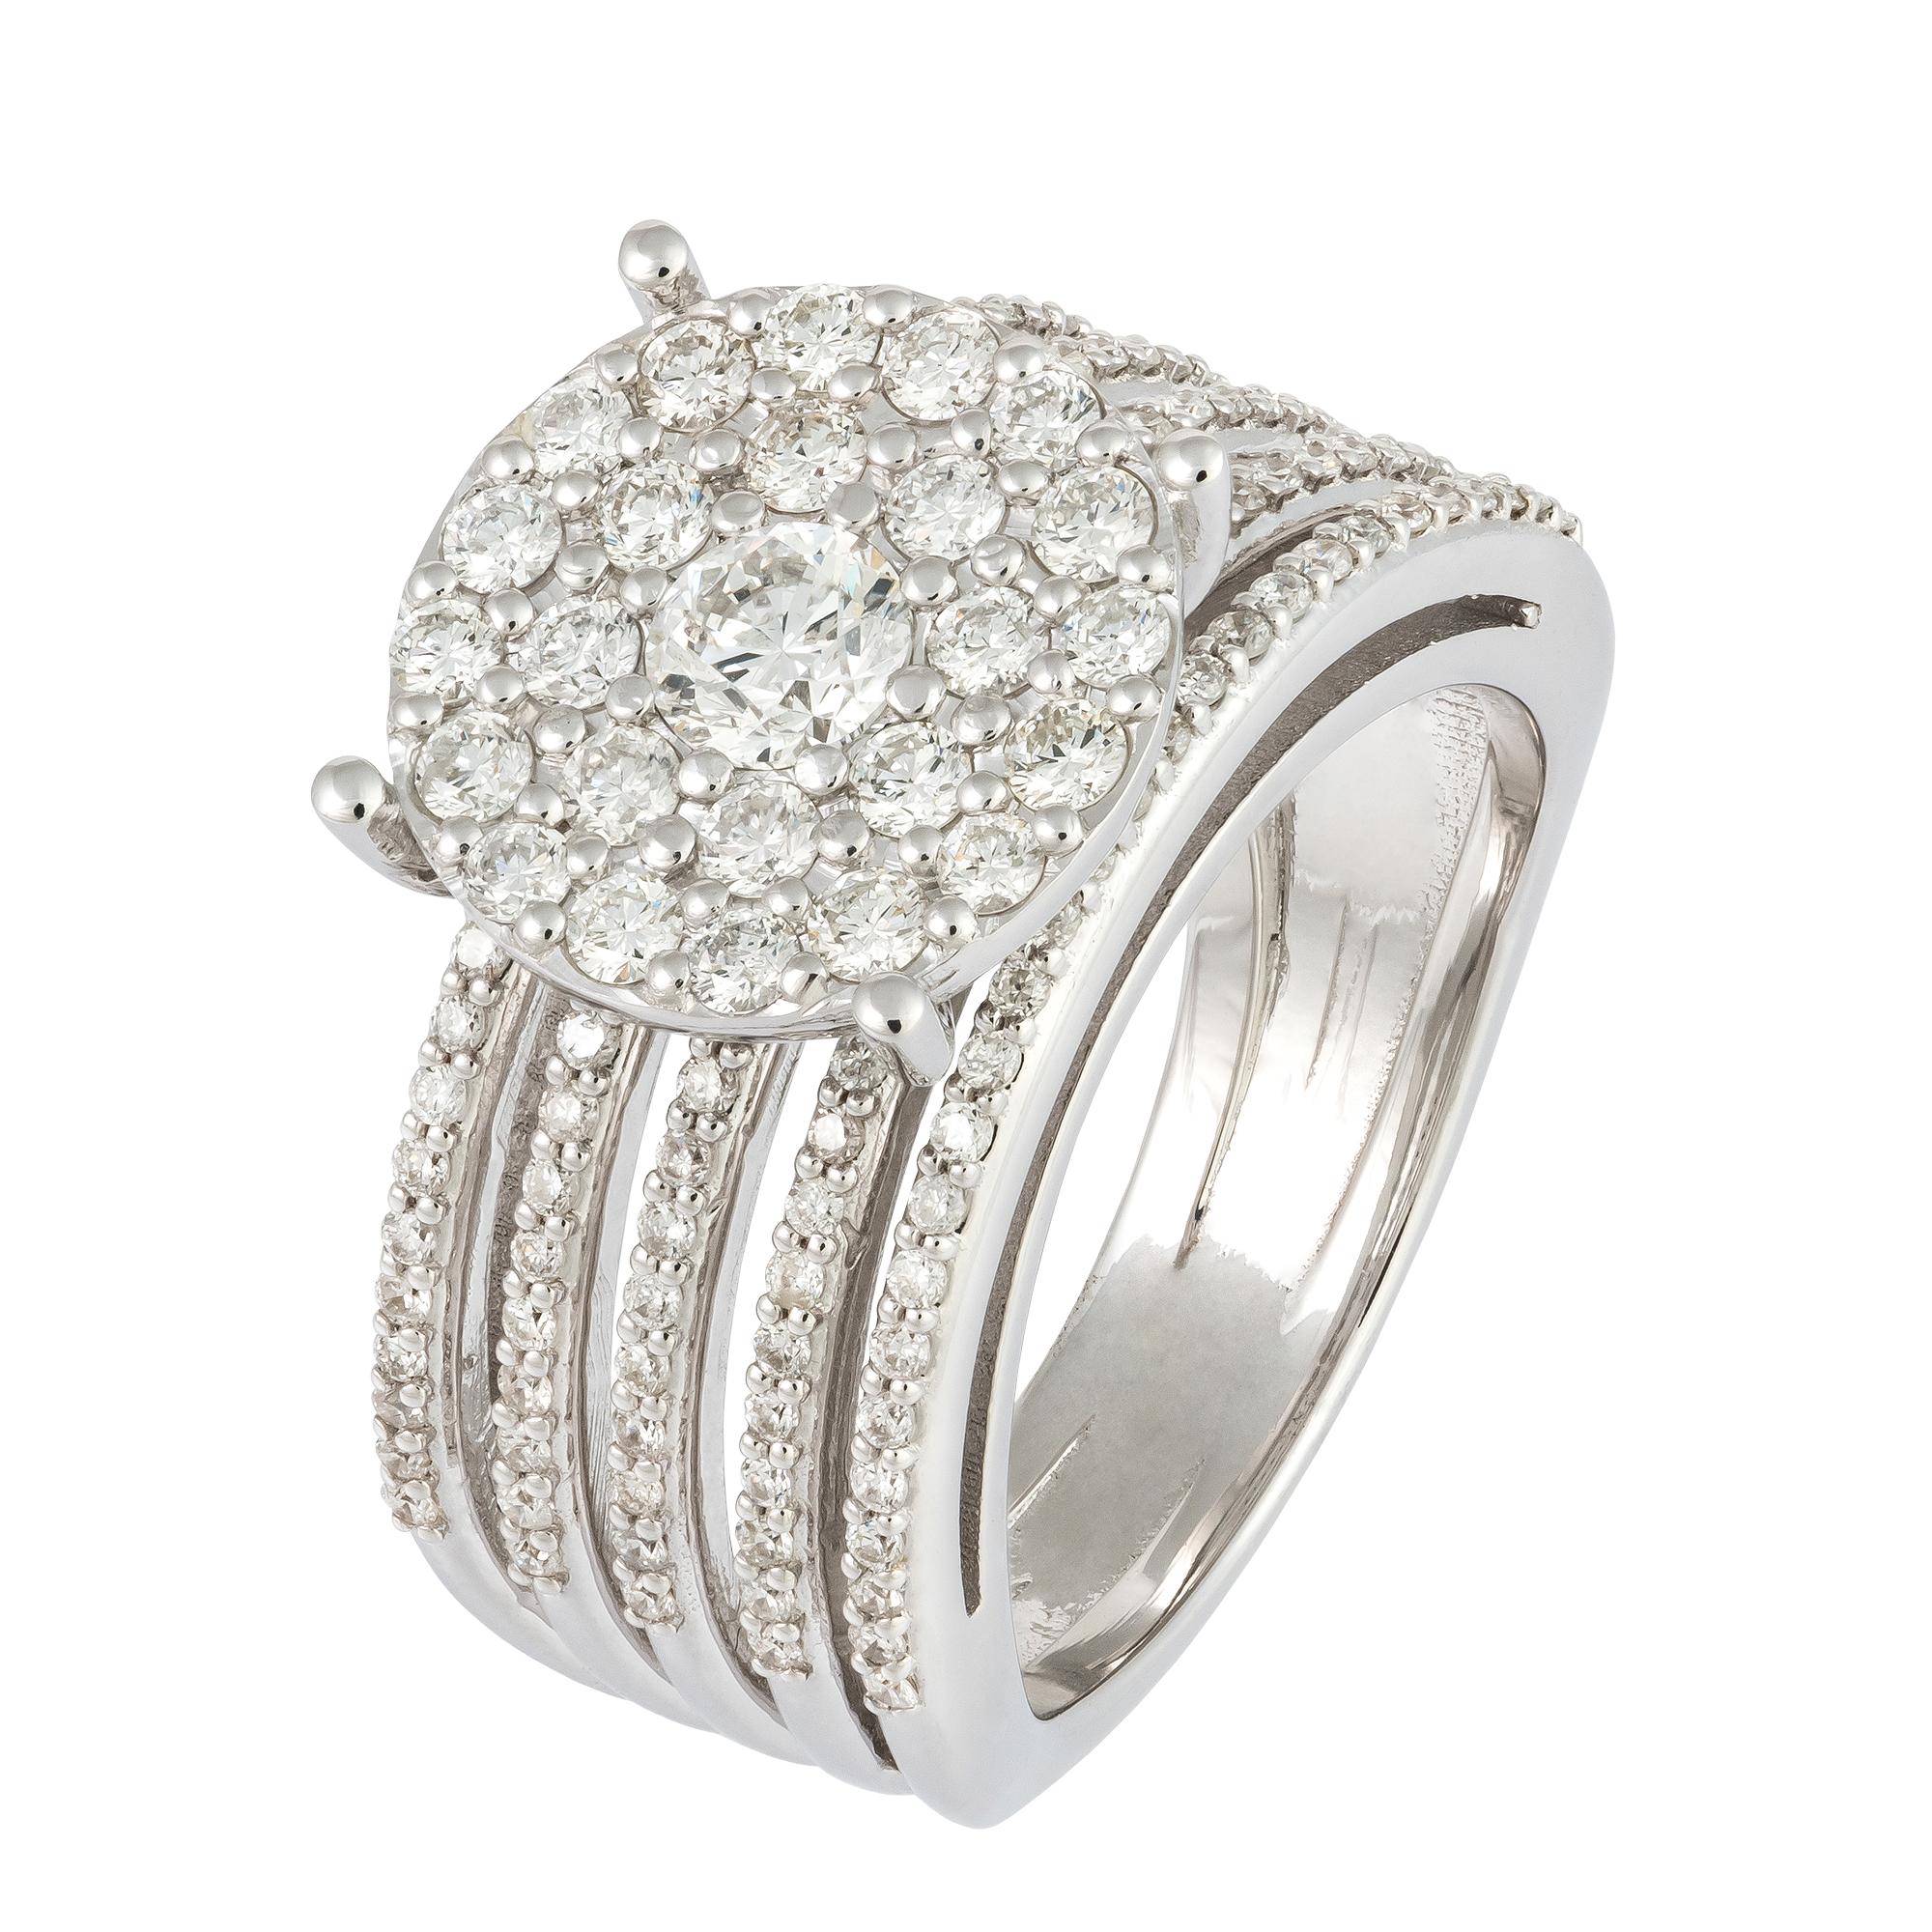 For Sale:  Statement White 18K Gold White Diamond Ring for Her 4